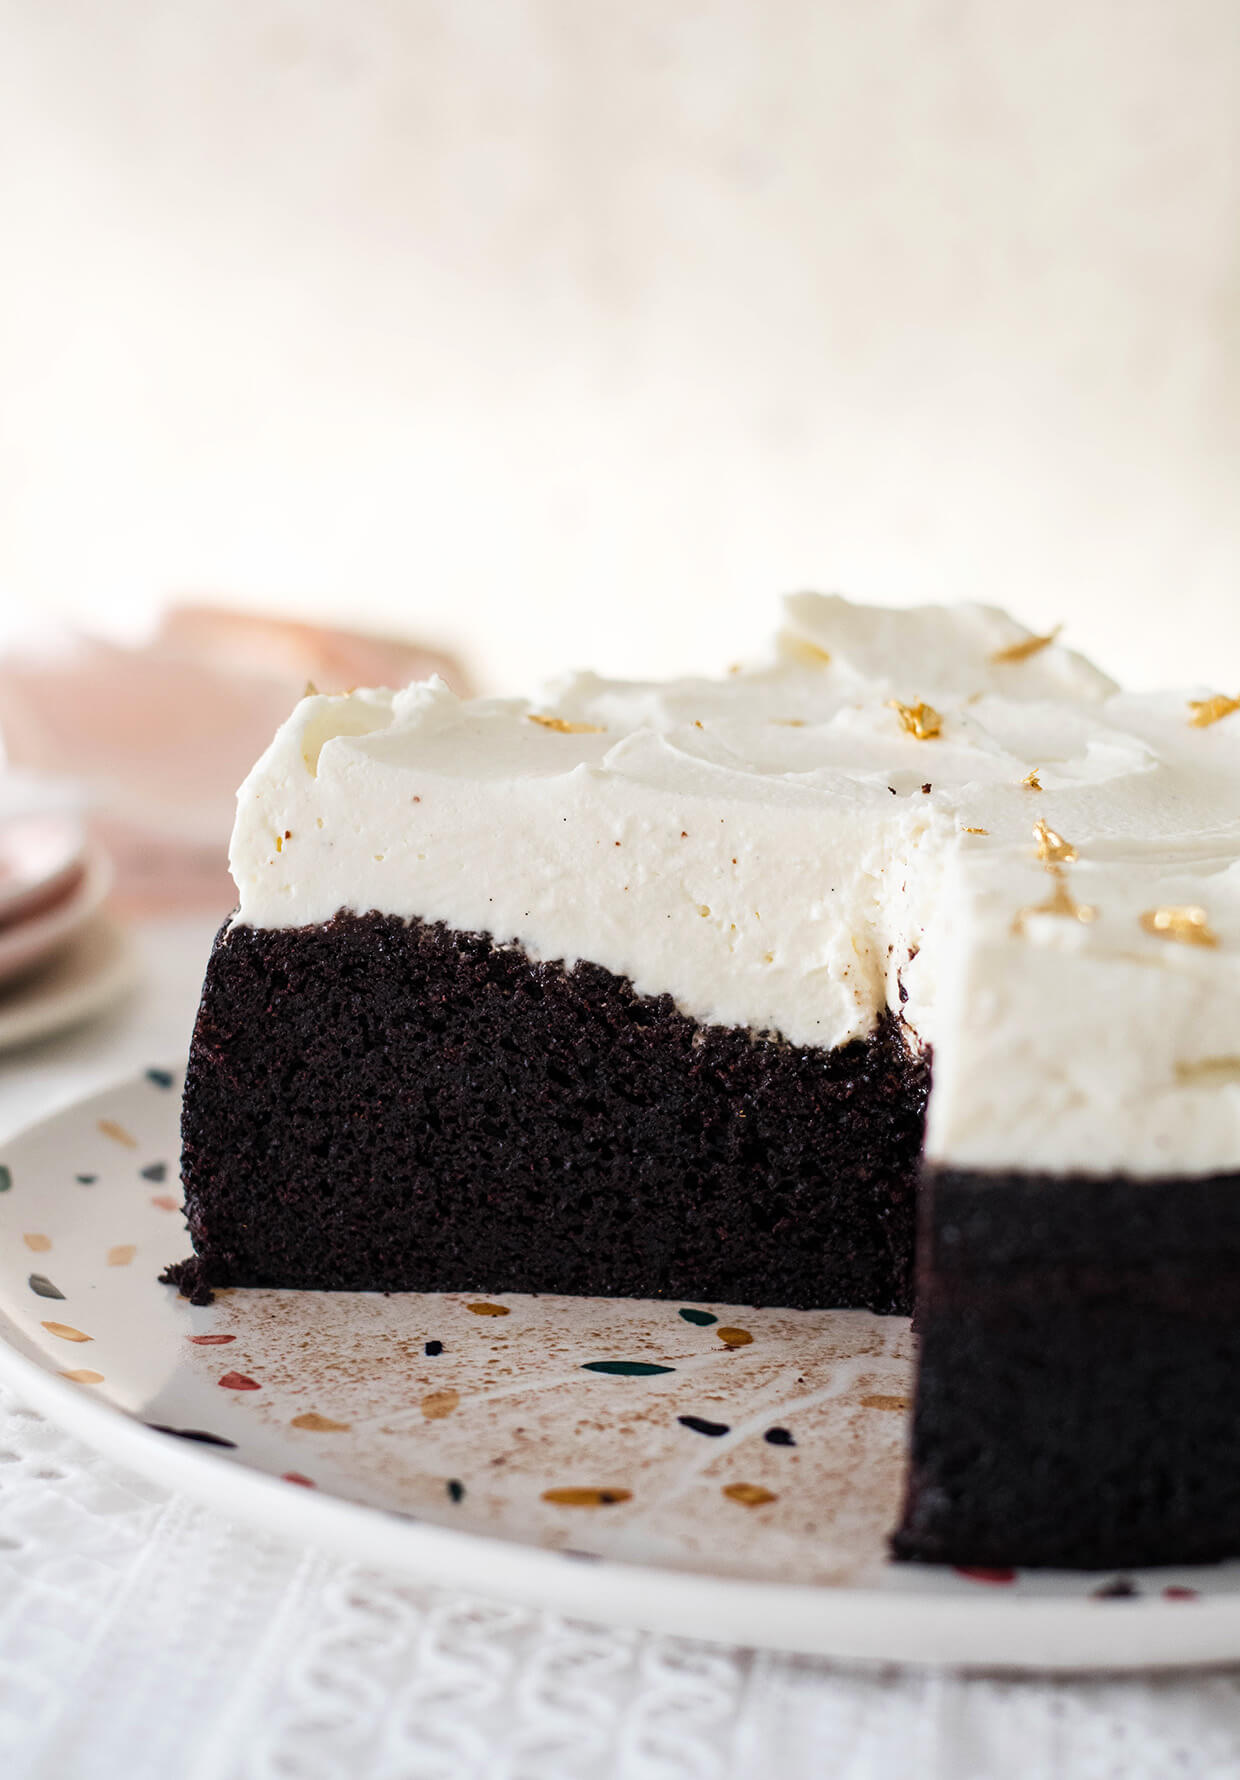 With a fierce chocolate flavor and superb mascarpone frosting, this chocolate stout cake just might be your new favorite cake! Single layer cake with plenty of frosting!